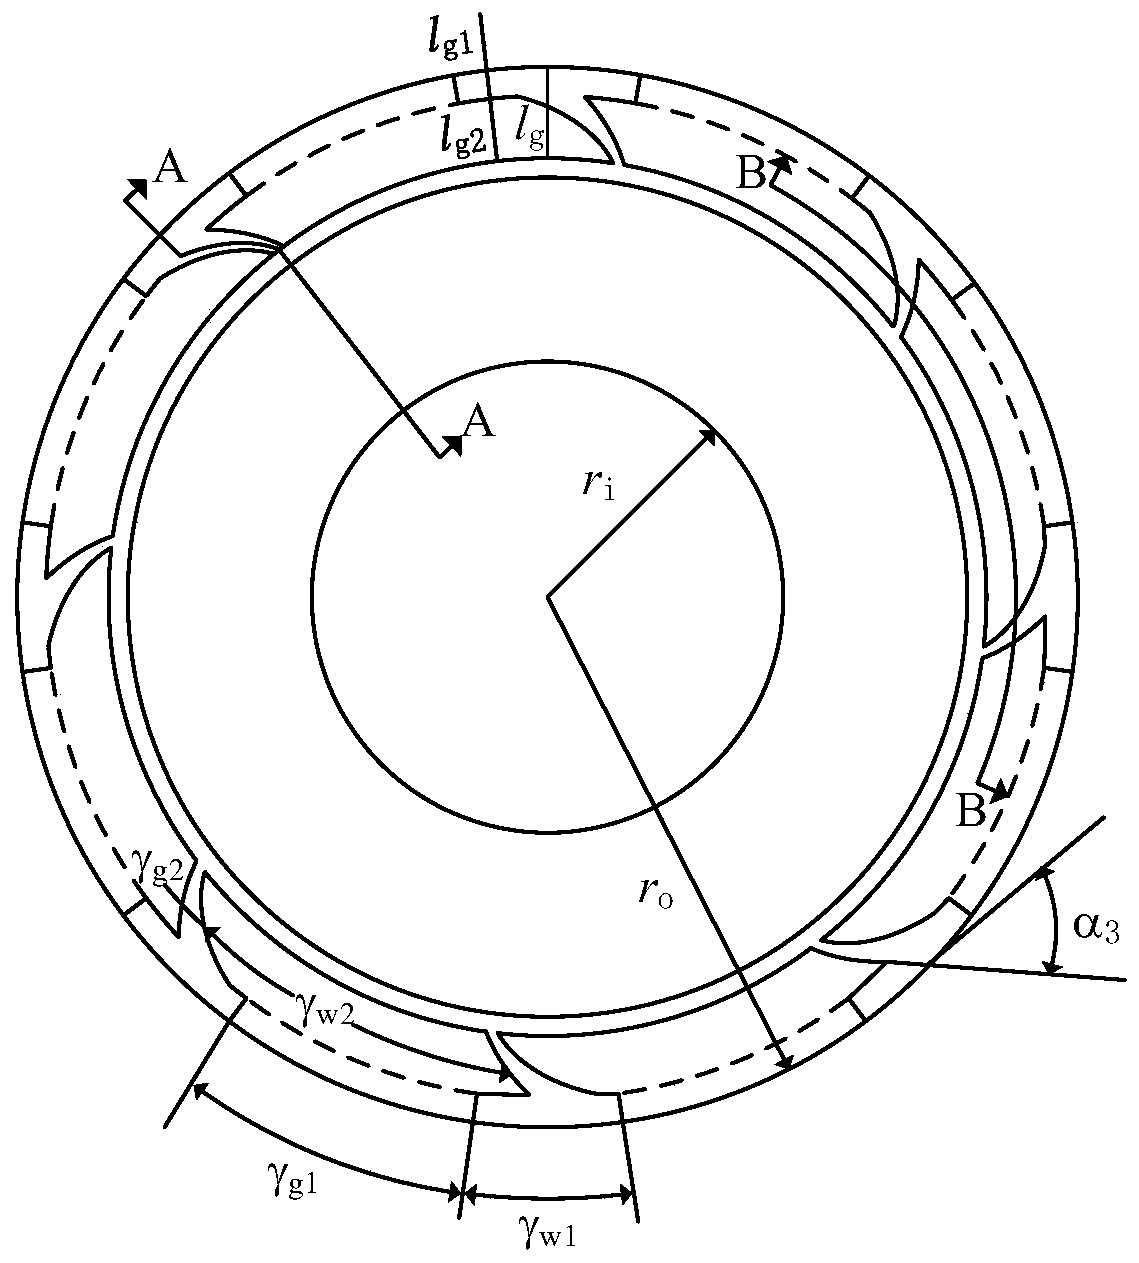 Mechanical seal end face structure of variable-depth spiral T-shaped groove